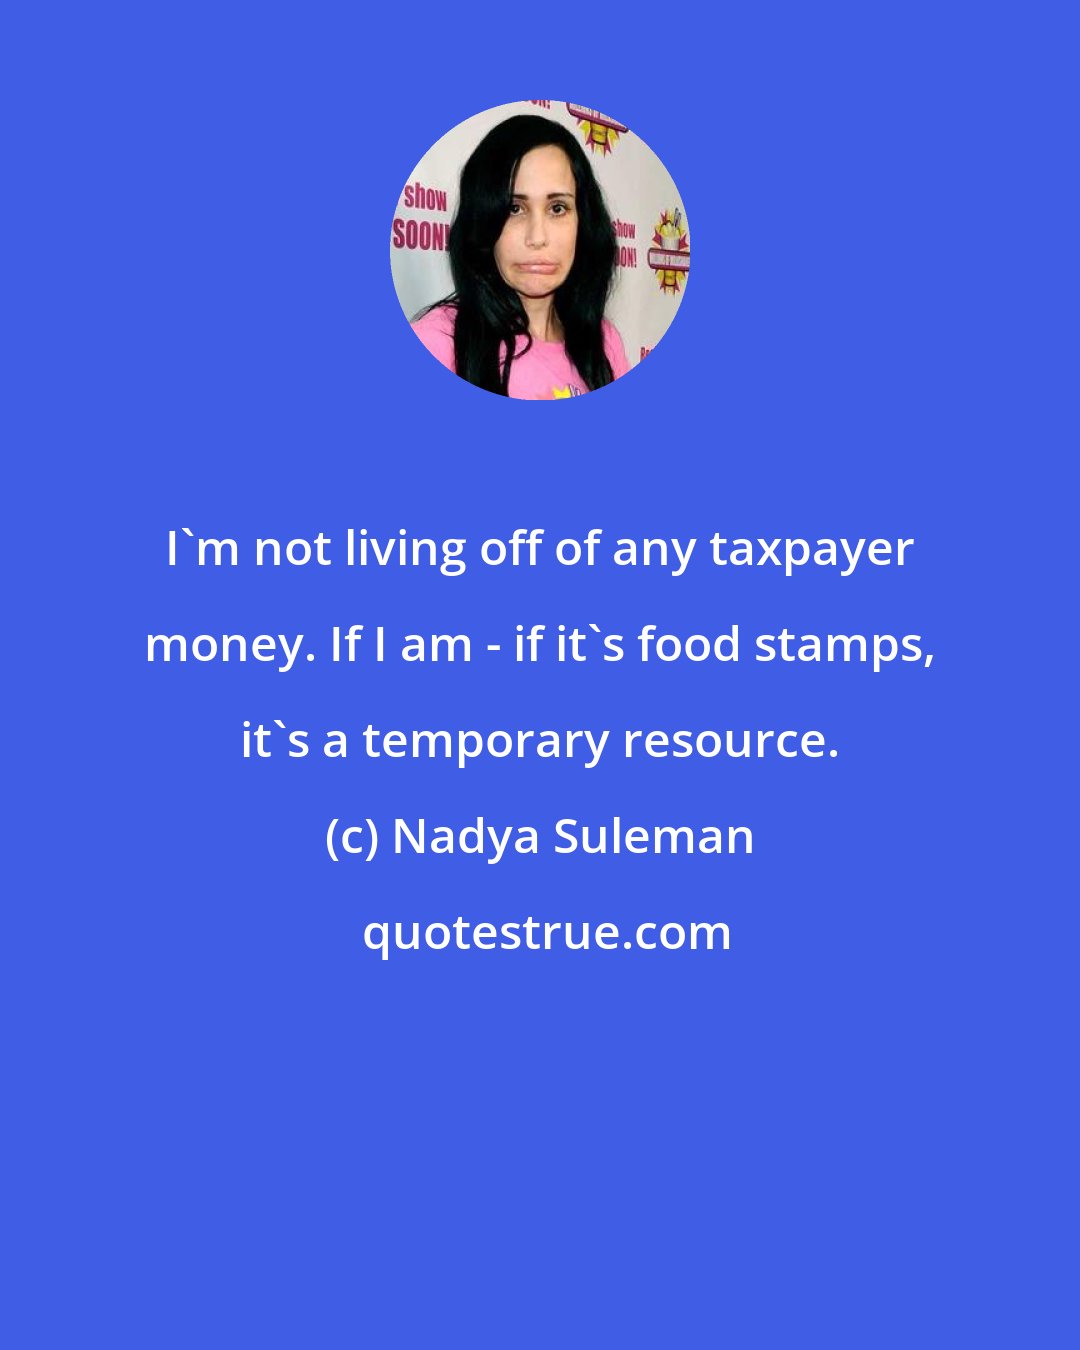 Nadya Suleman: I'm not living off of any taxpayer money. If I am - if it's food stamps, it's a temporary resource.